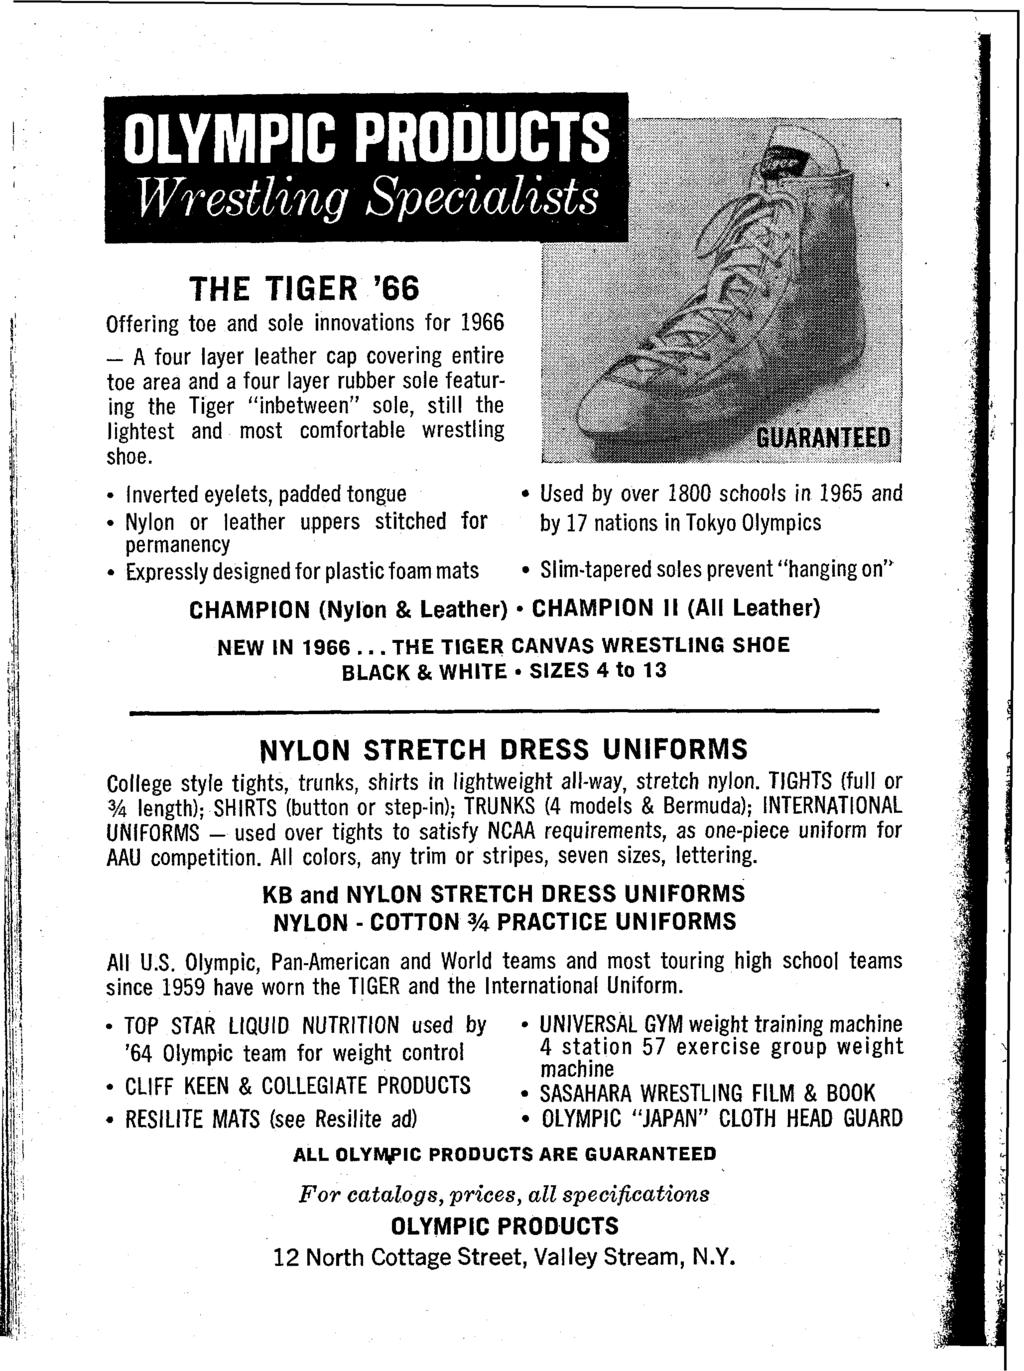 THE TIGER '66 Offering toe and sole innovations for 1966 - A four layer leather cap covering entire toe area 2nd a four layer rubber sole featuring the Tiger "inbetween" sole, still the lightest and